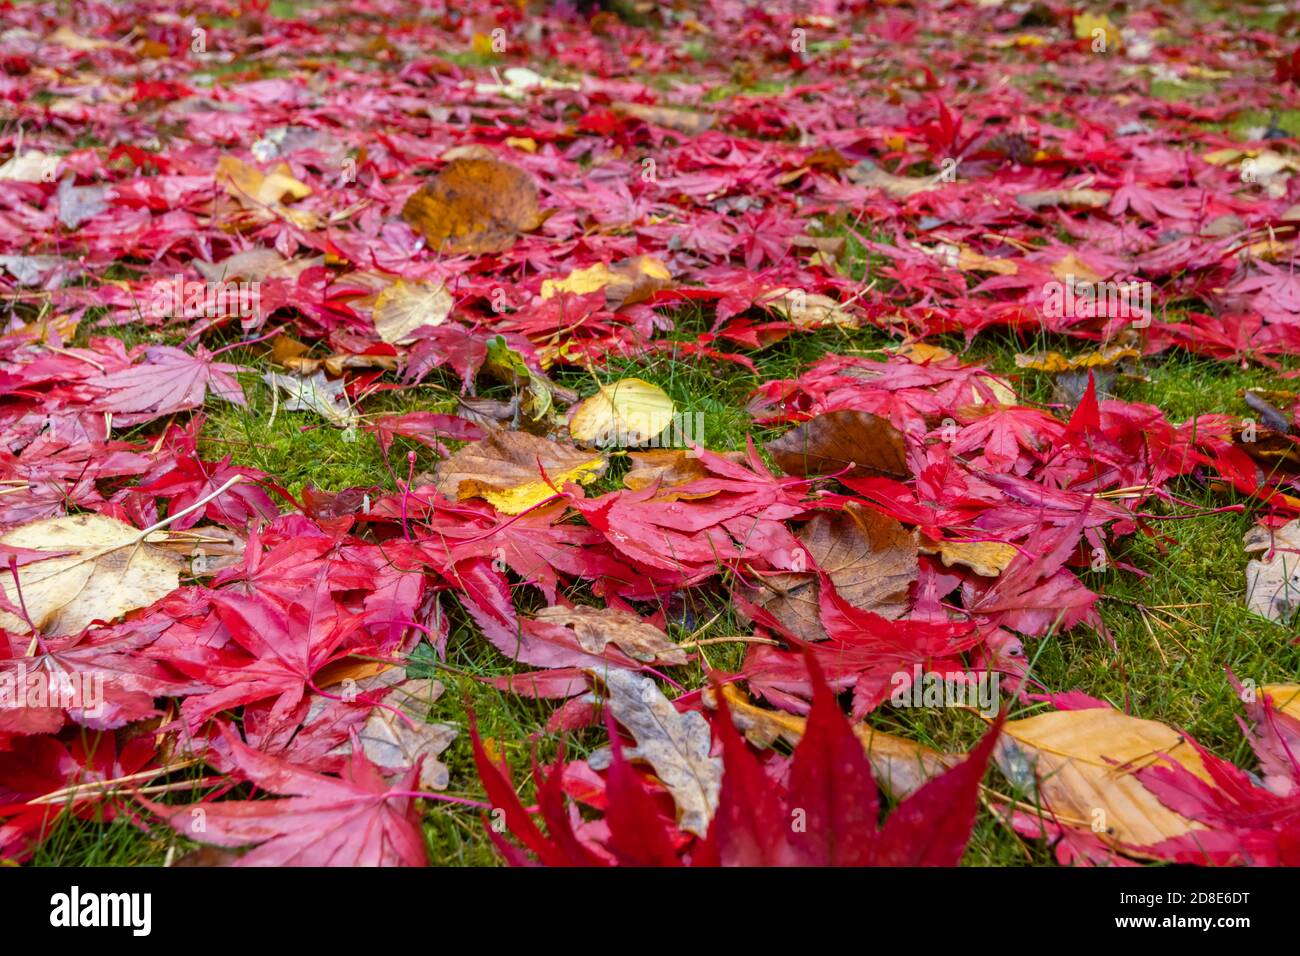 Mixed wet fallen leaves, mainly scarlet red Acer palmatum Japanese maple, in rich autumn colours on a lawn in a garden in Surrey, south-east England Stock Photo